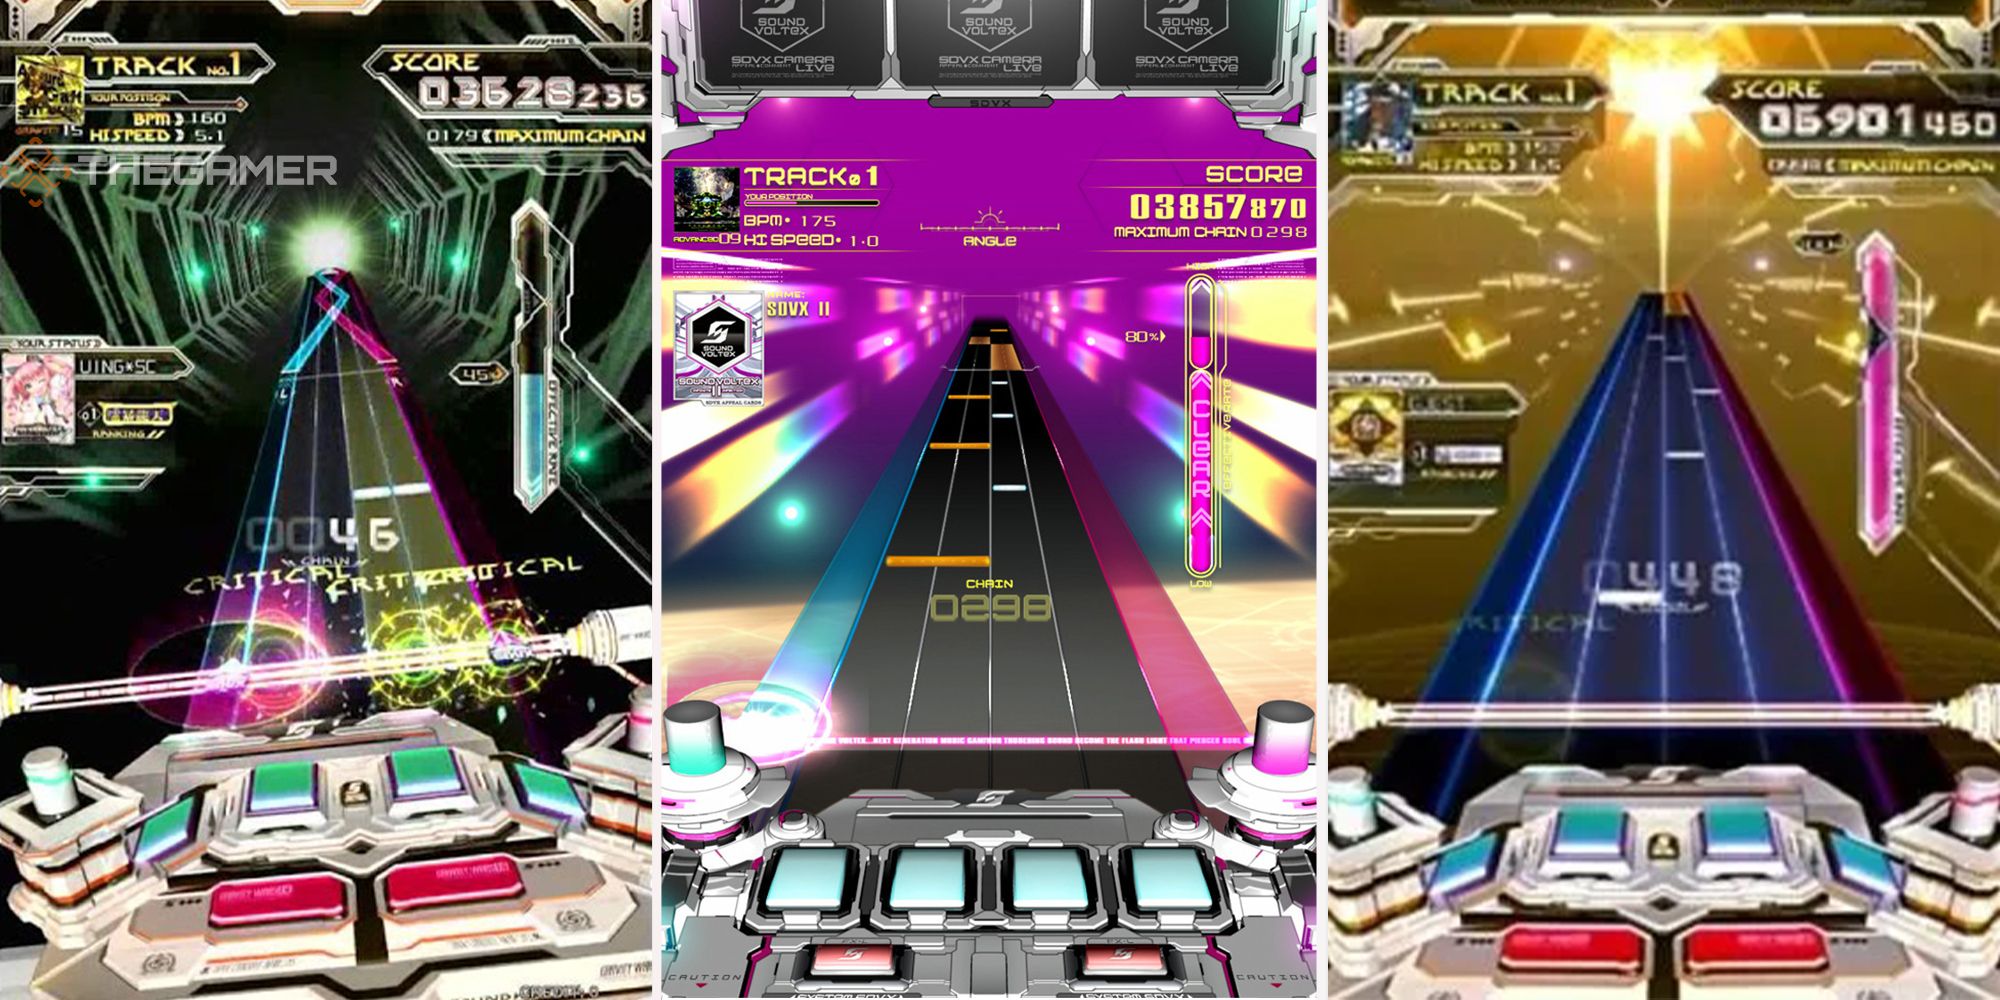 Three space like sound consoles take on a barrage of notes in the arcade game, Sound Voltex.